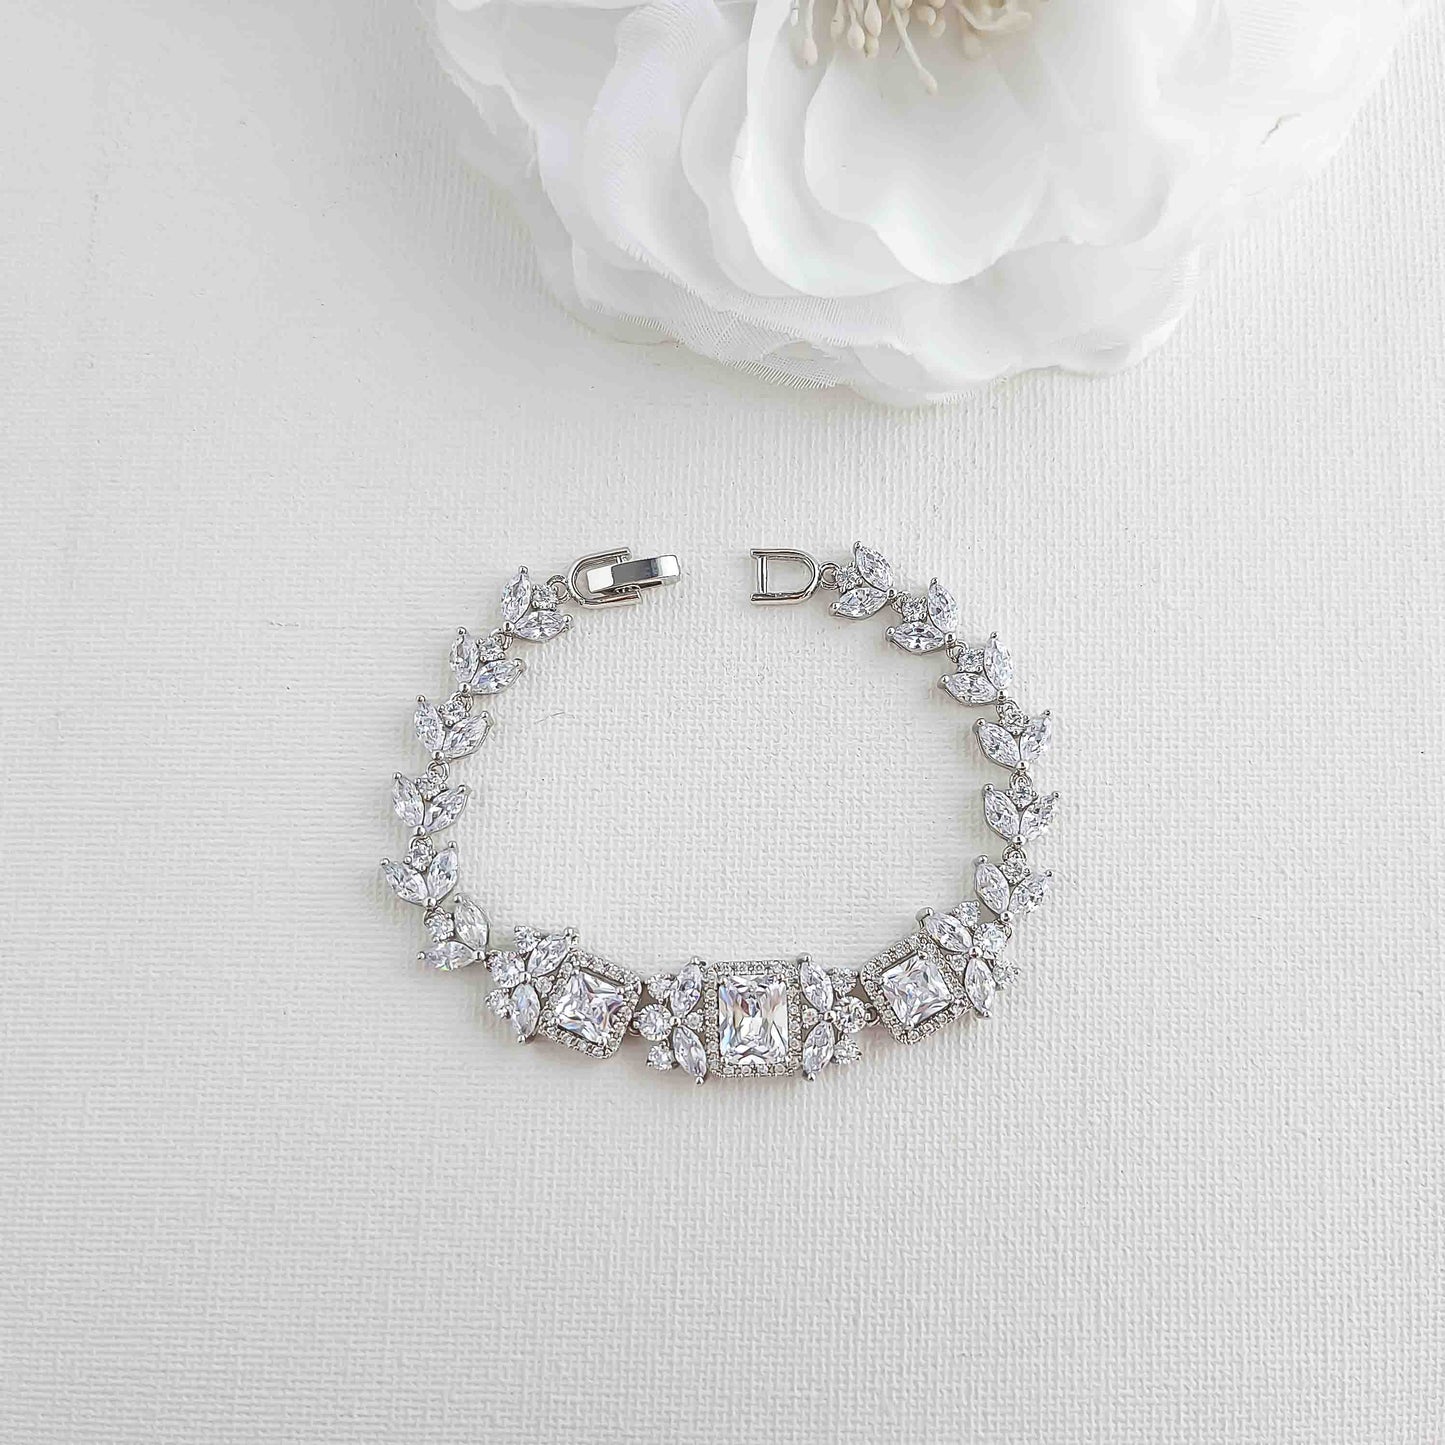 Bracelet Set for Wedding With Earrings-Lacie